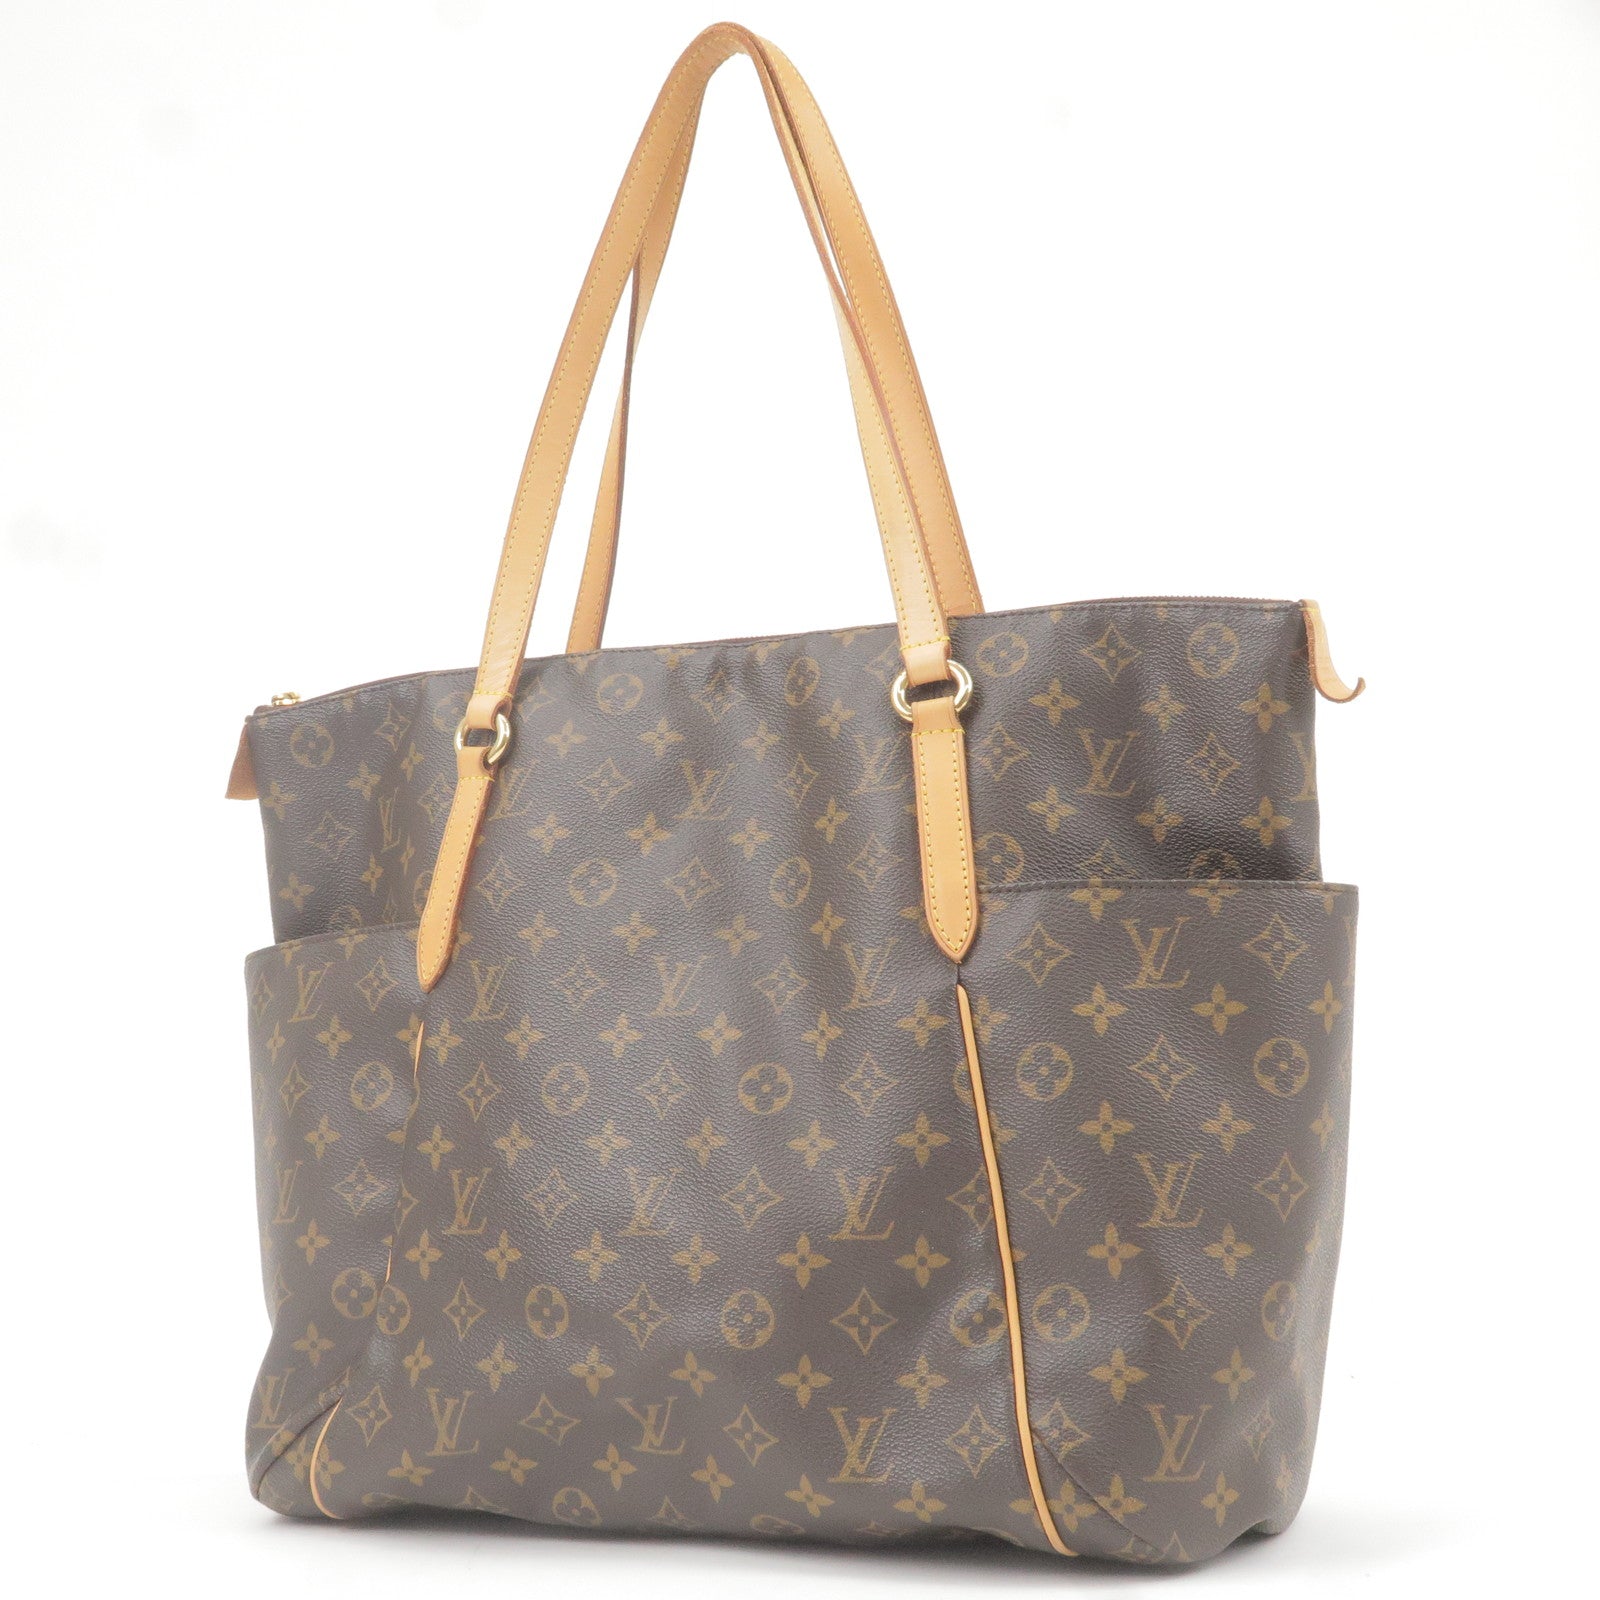 M56690 – dct - ep_vintage luxury Store - Monogram - GM - Vuitton - louis  vuitton virgil abloh 10000 usd Sacpack fall winter 2019 collection - Tote -  Louis - Bag - Totally